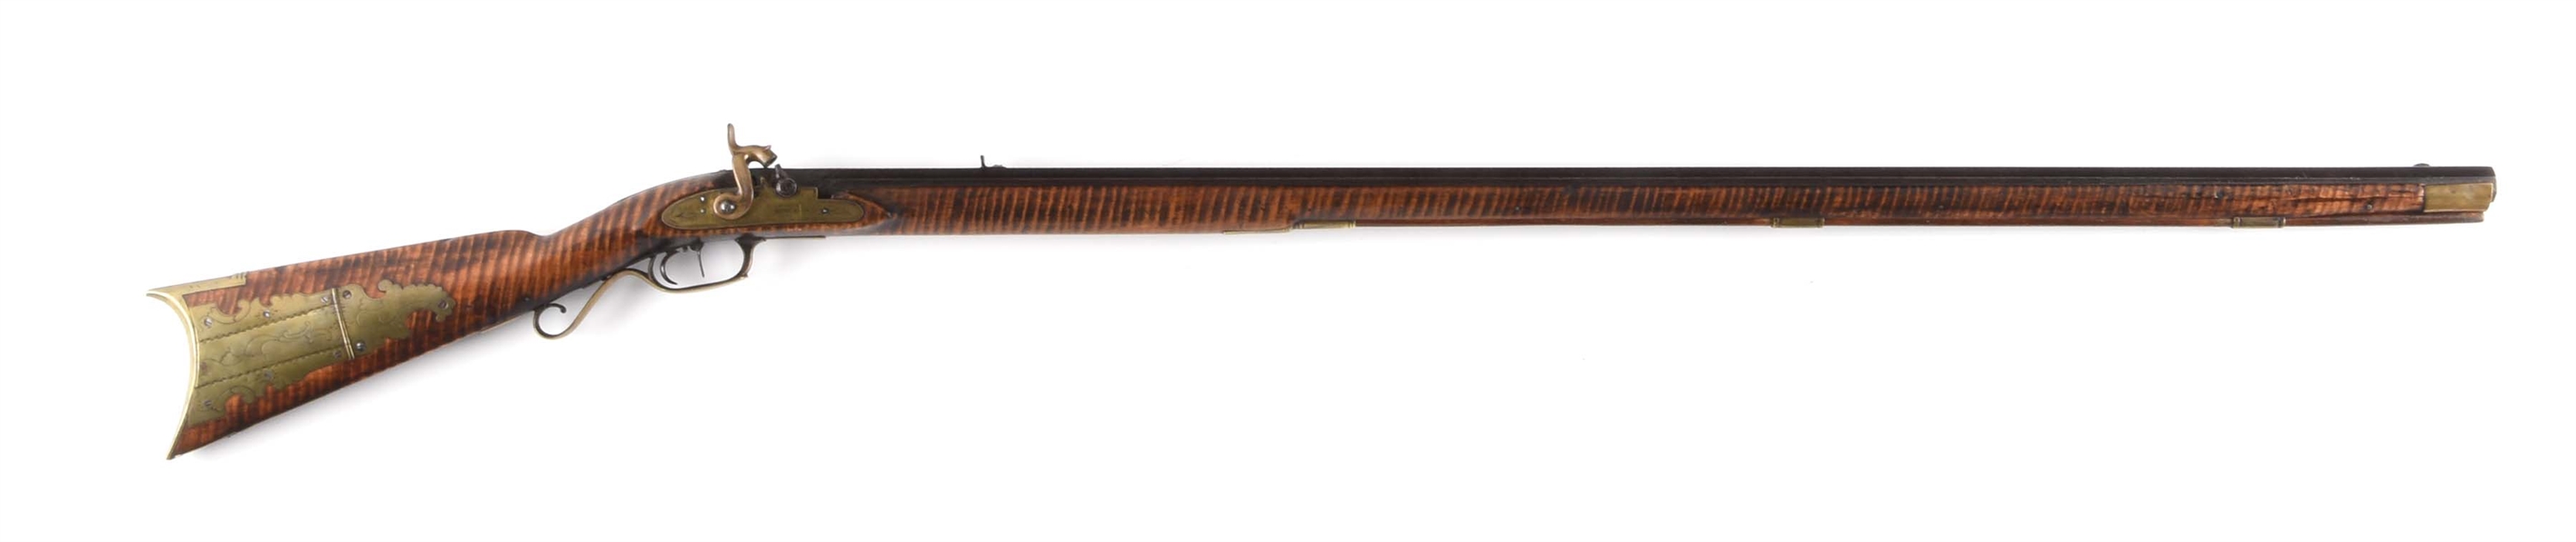 (A) FULLSTOCK OHIO LONG RIFLE BY ROGERS.